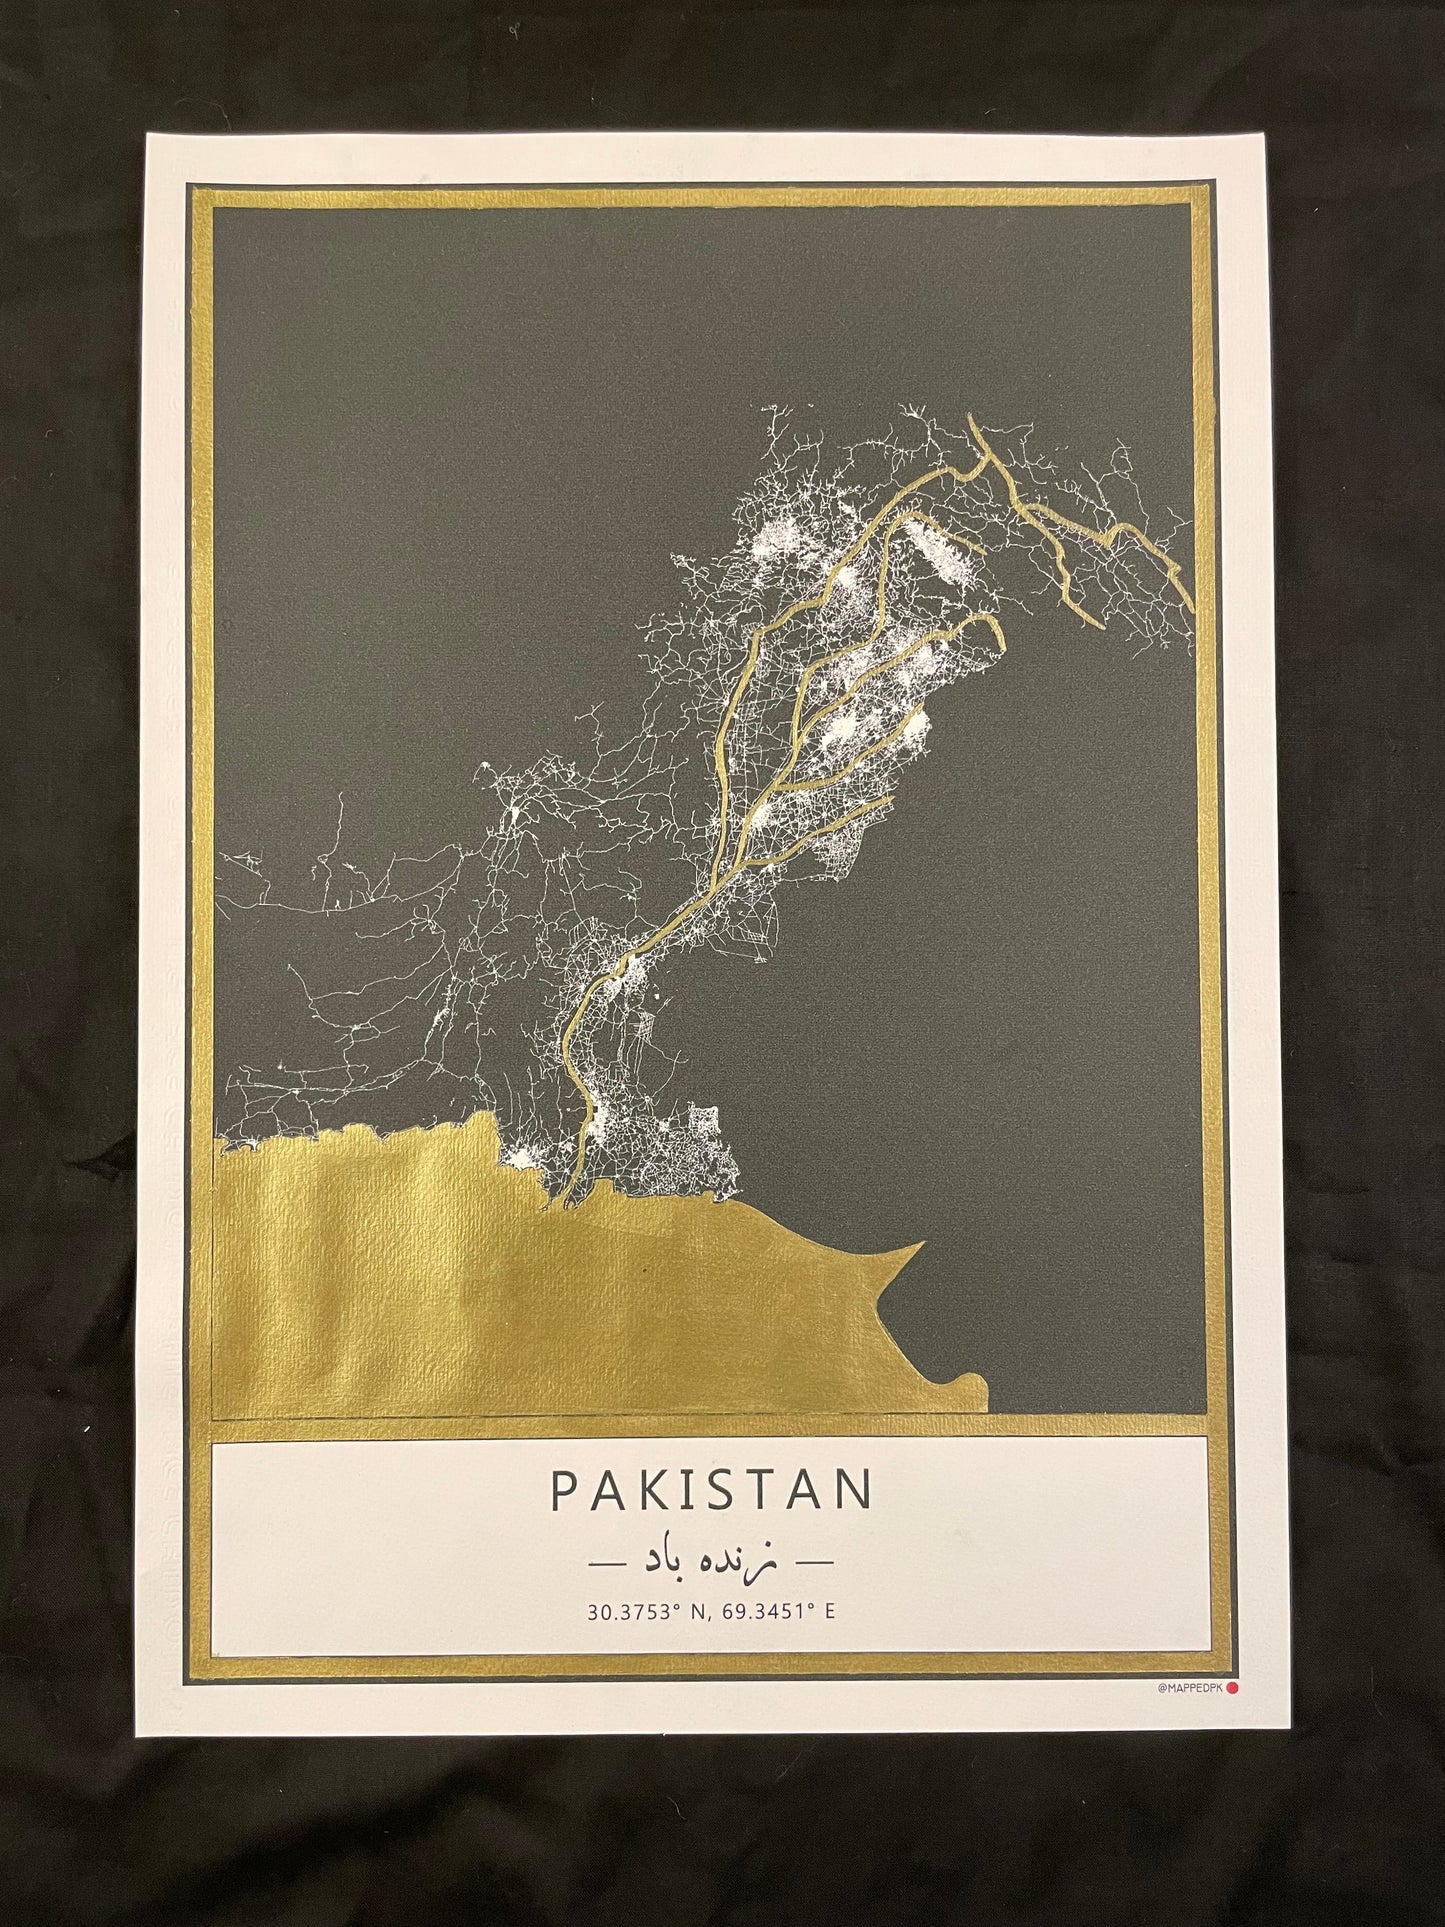 Pakistan - Gold Hand Painted A3 Map